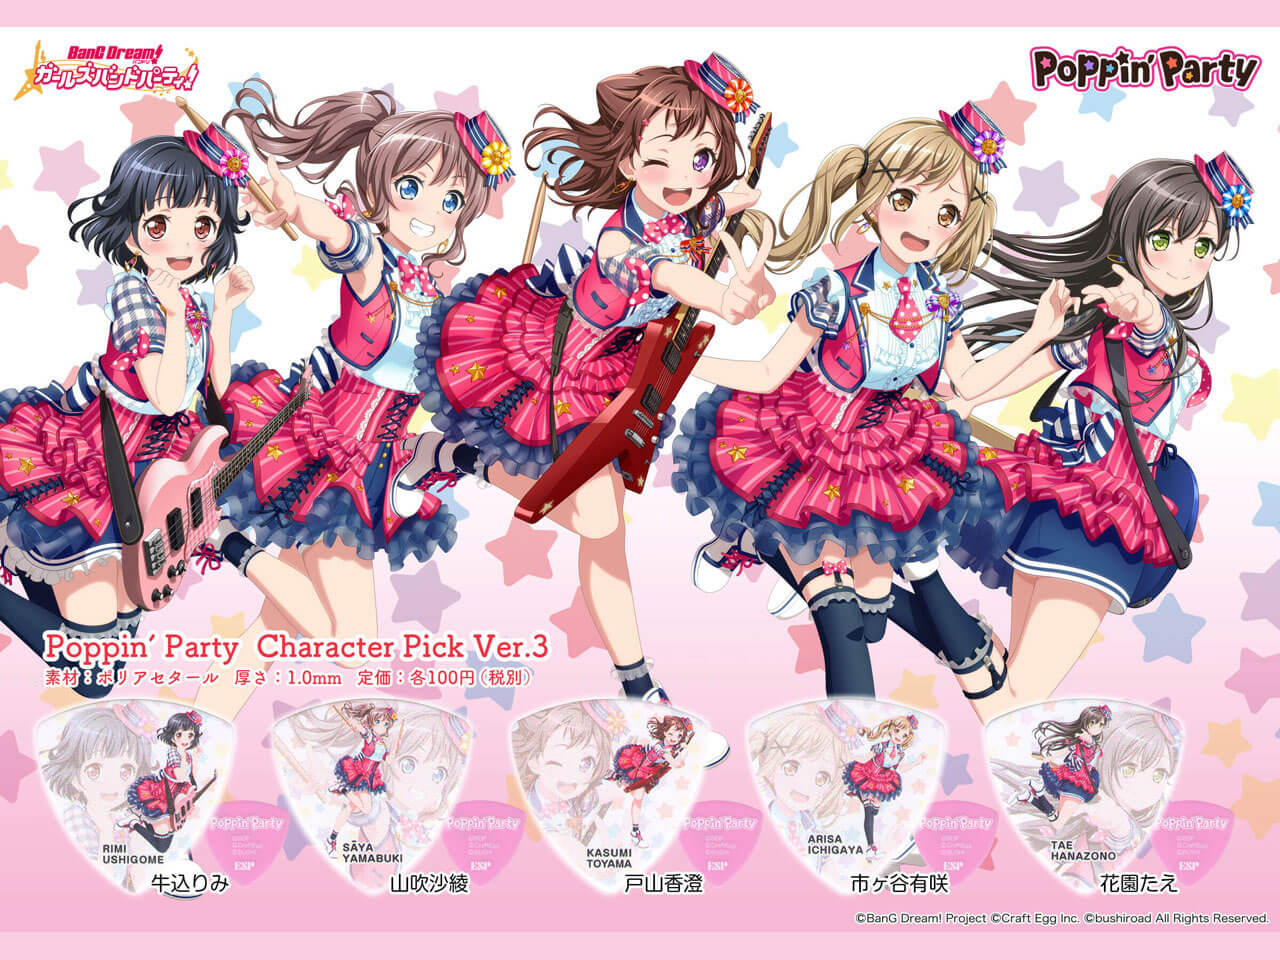 【ESP×BanG Dream!コラボピック】Poppin’Party Character Pick Ver.3 "花園たえ"10枚セット（GBP Tae Poppin Party 3）